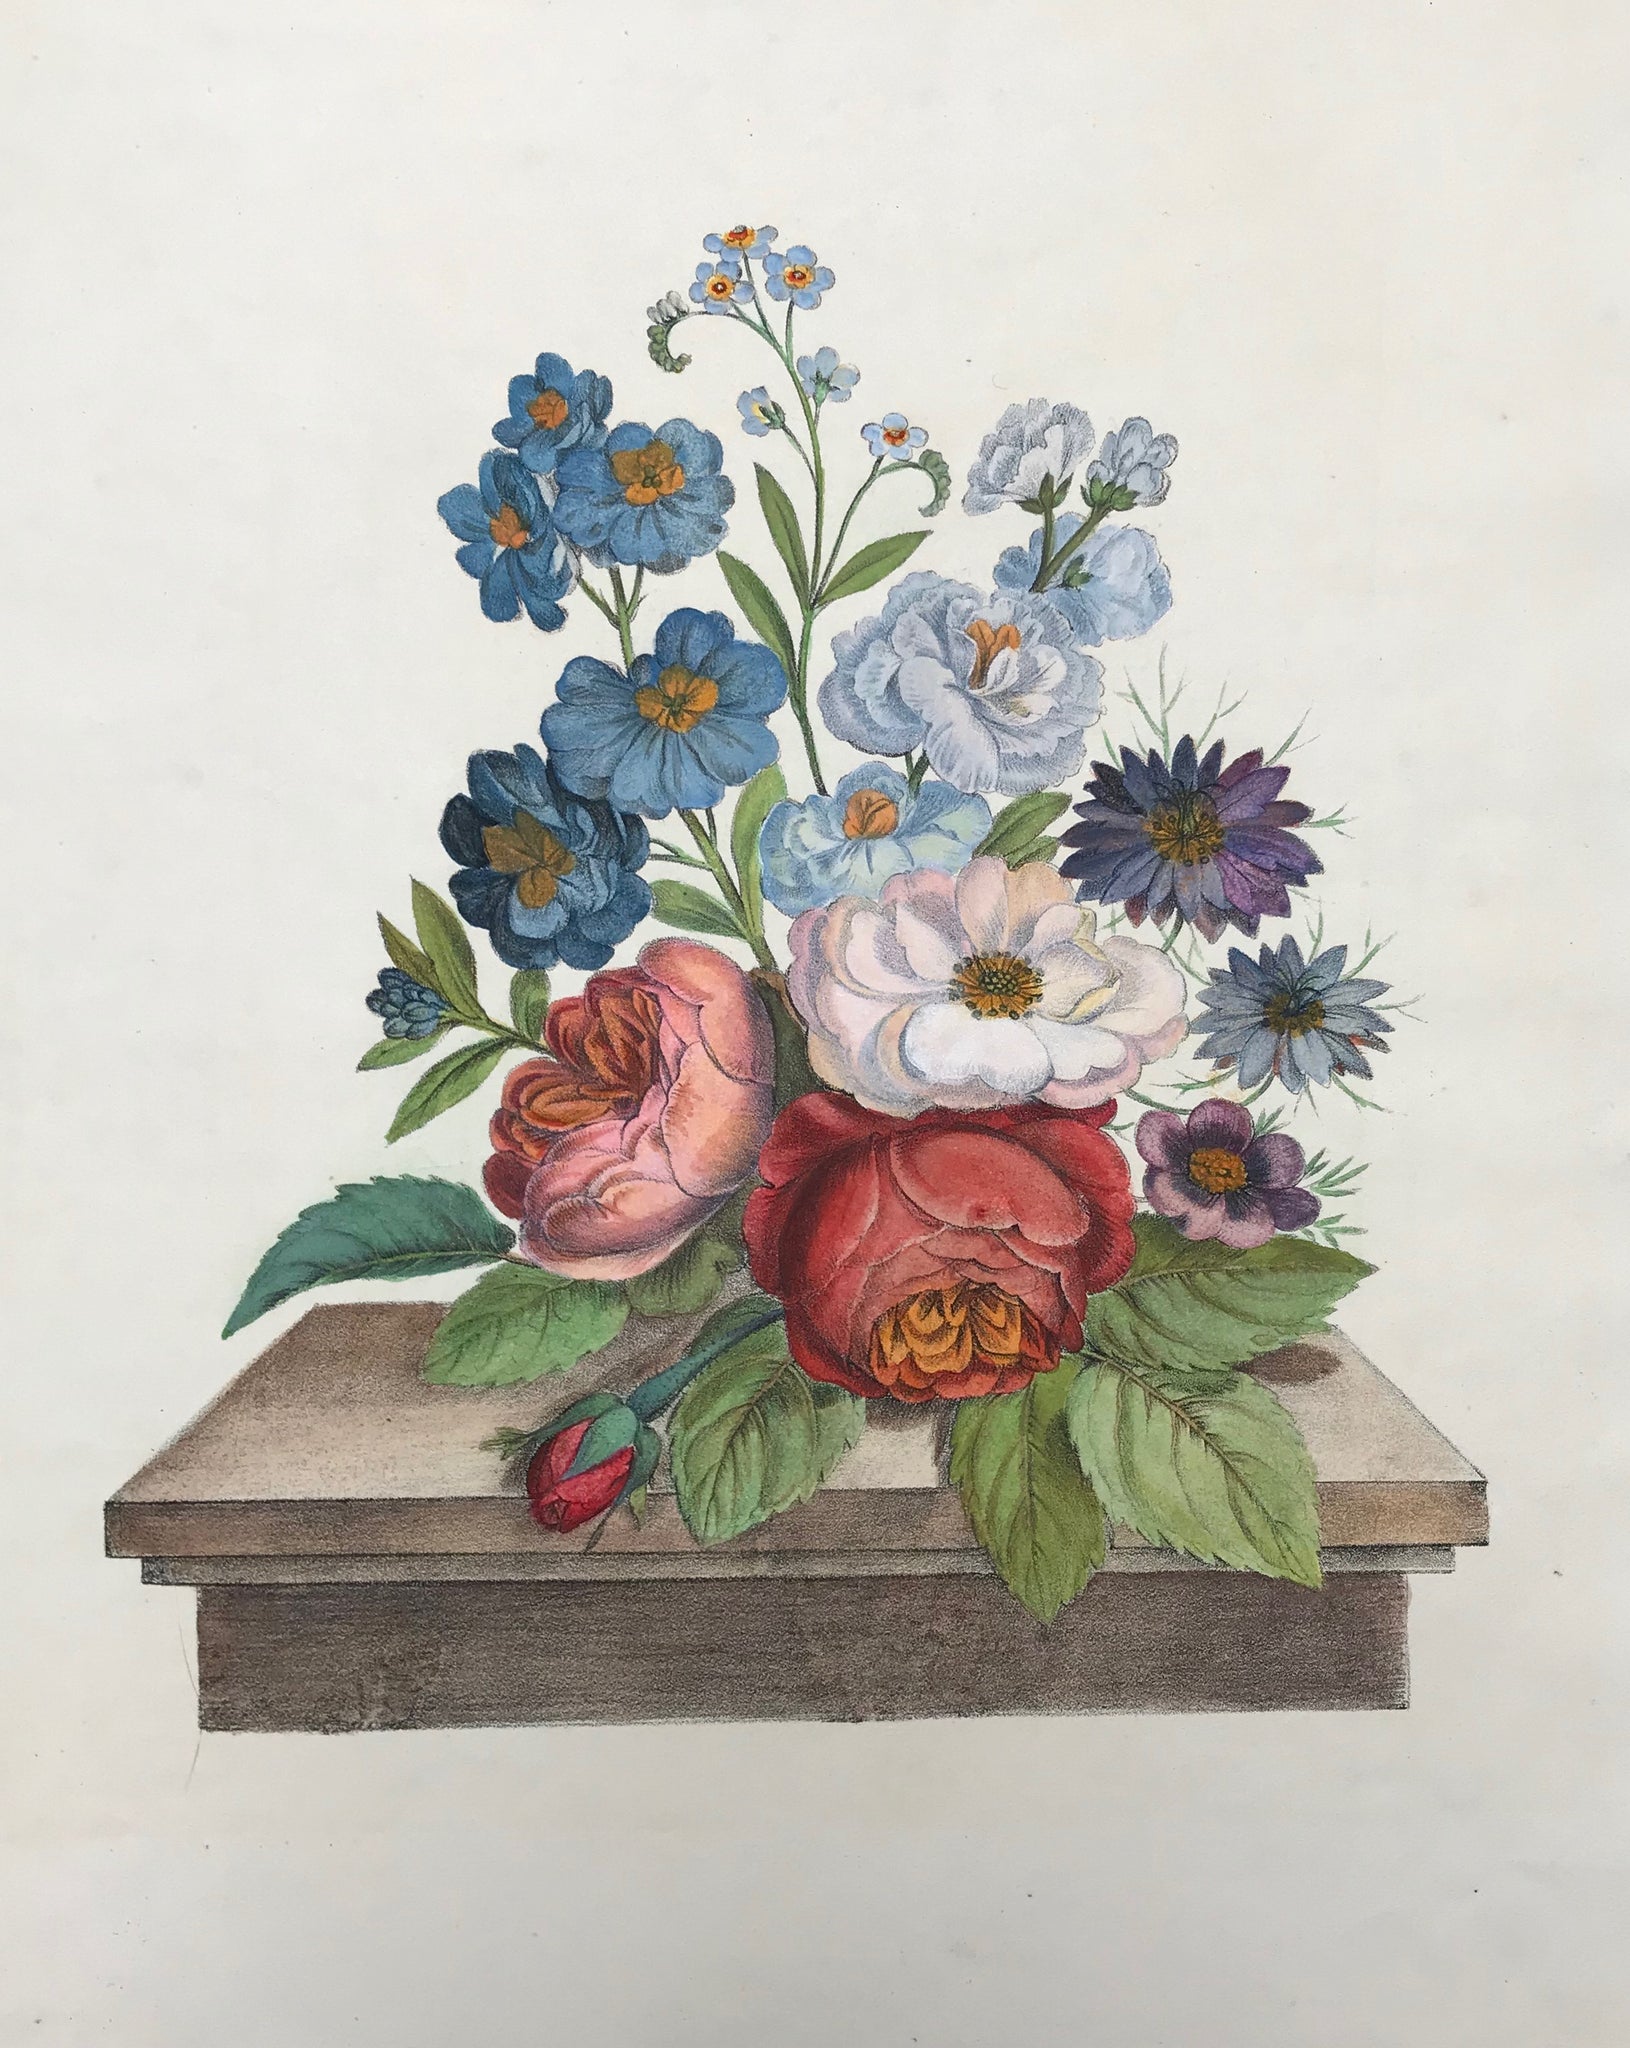 No title. Flower Bouquet with roses.  Hand-colored lithograph after John Edwards  Signed in socket on left.  Printed and published: London, ca. 1840